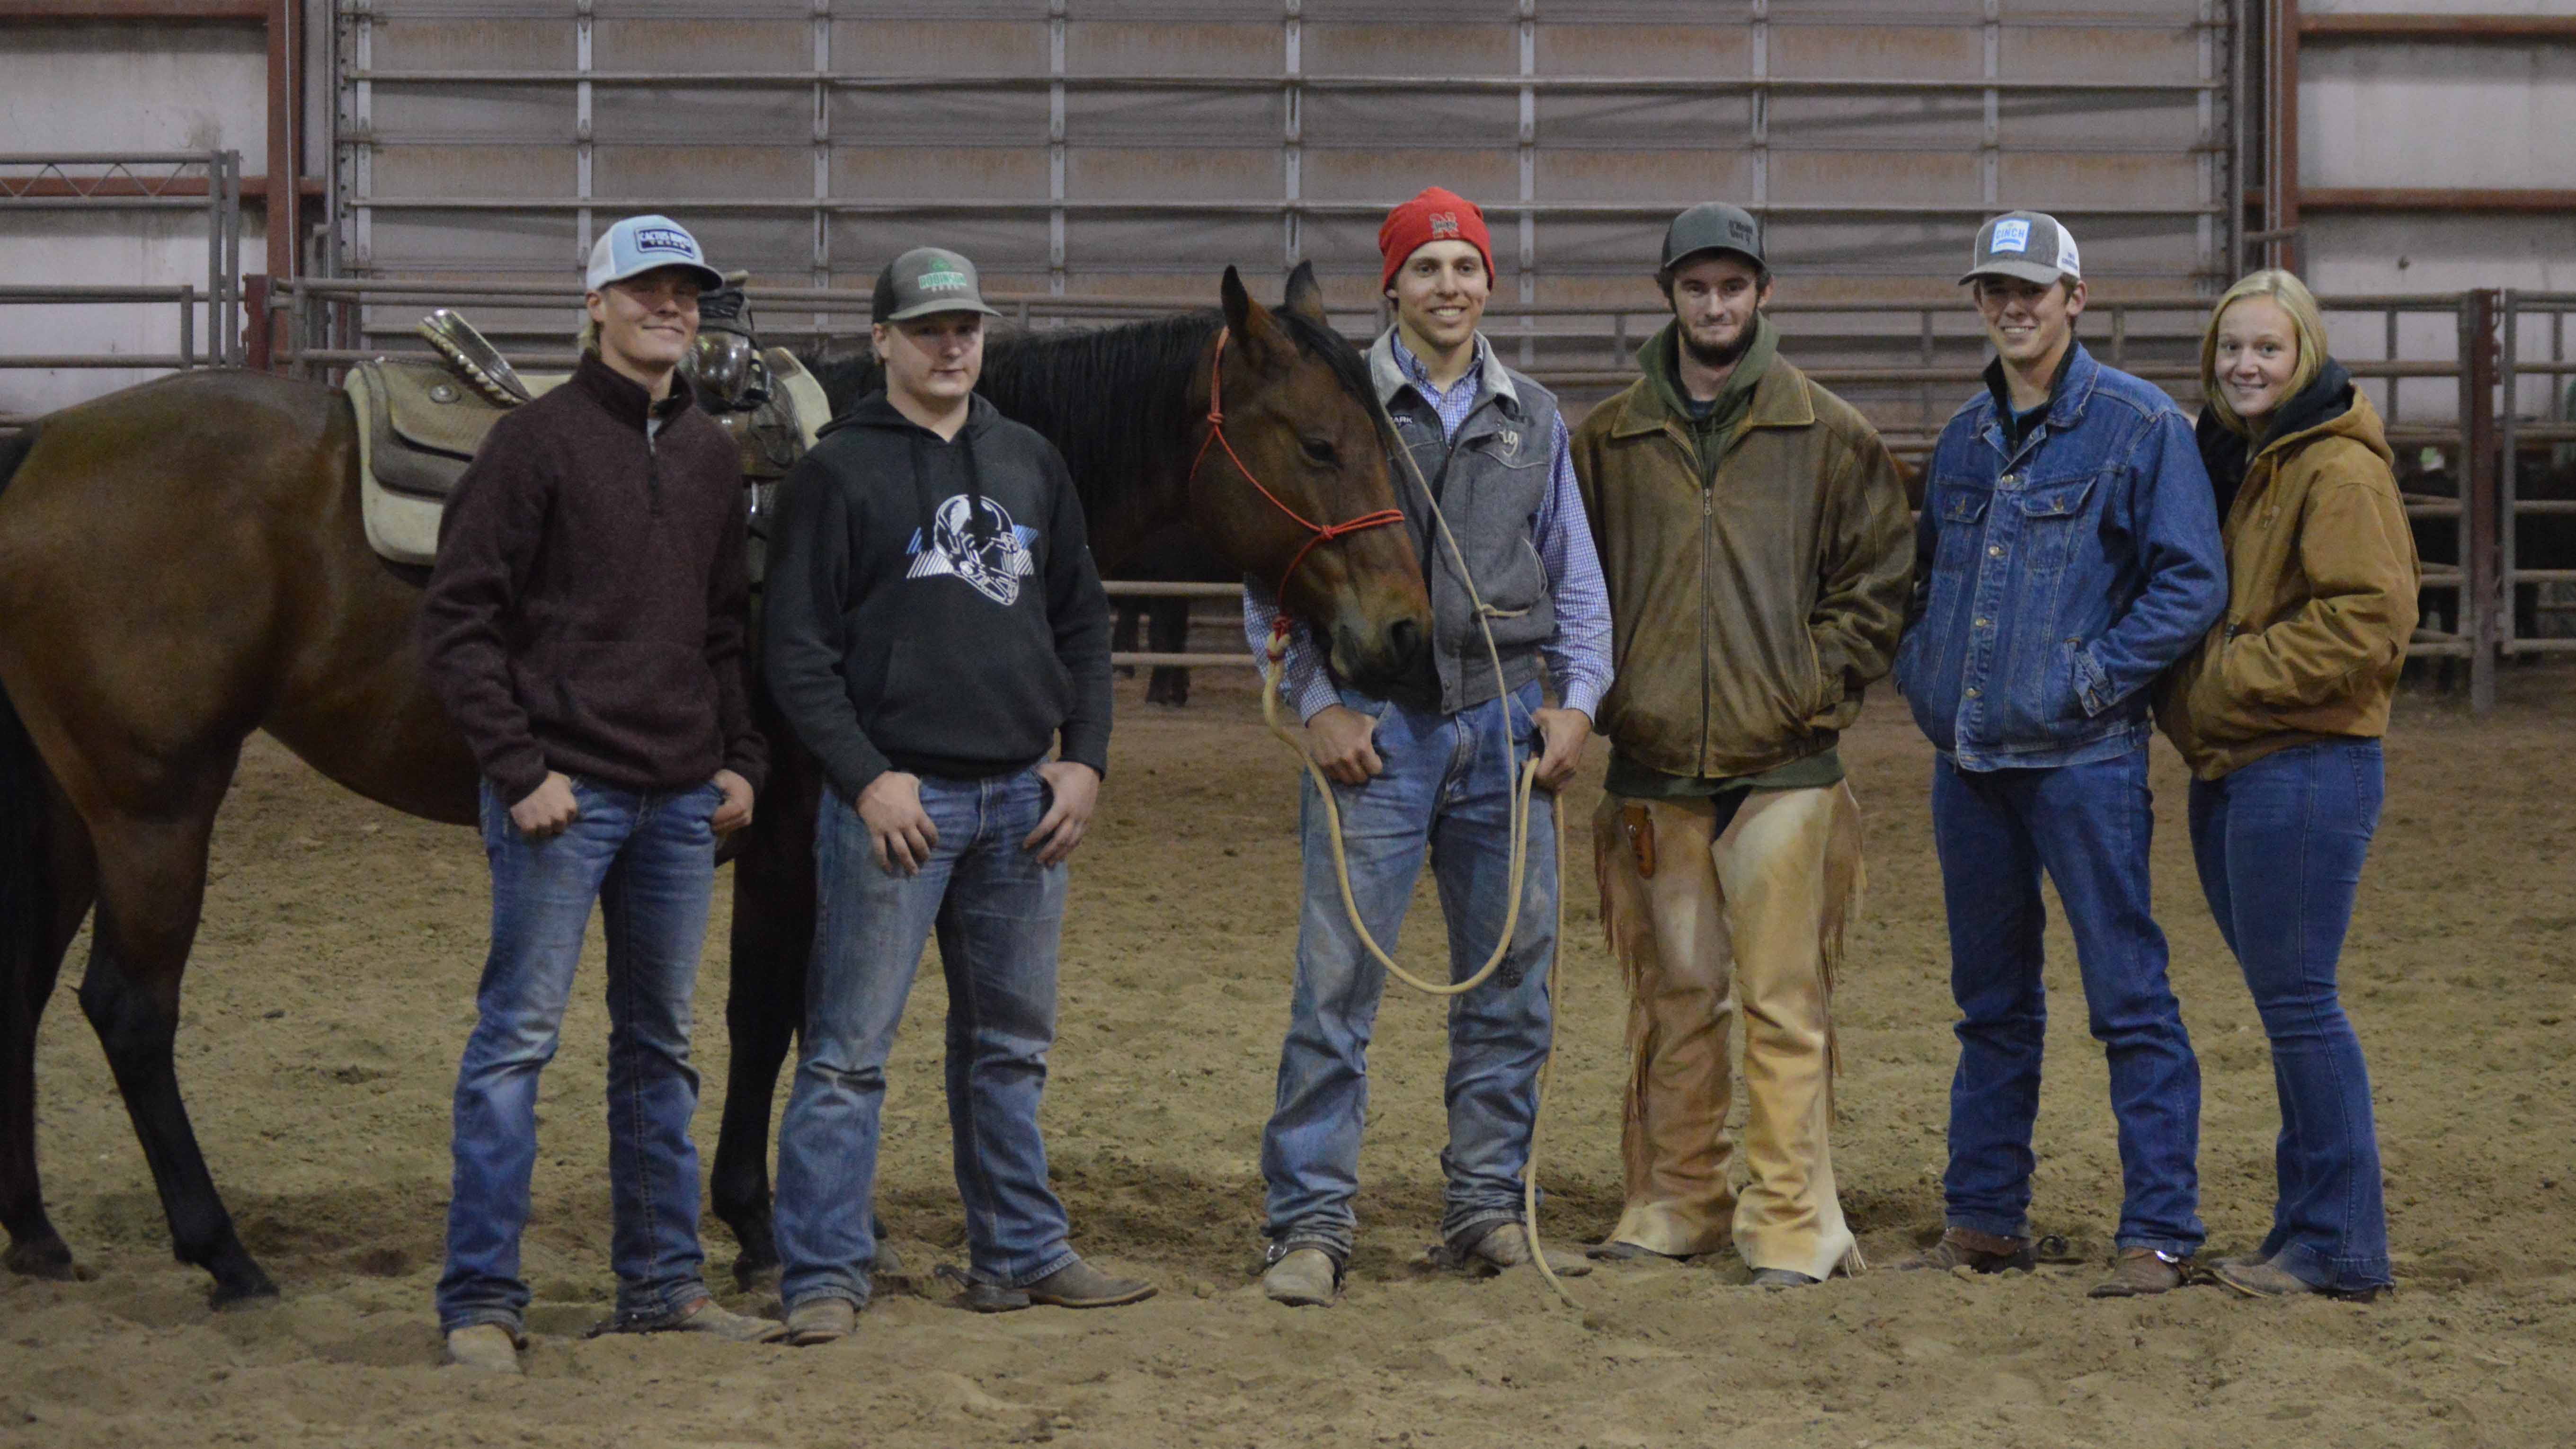 NCTA graduate Quentin Anderson of Pierce (center with horse) and his rodeo teammates, from left, Bryce Tobiassen, Hildreth; Ryan Smith, Ragan; Anderson, Wyatt Colman, O’Neill; Nathan Burnett, Shelton; and Caprice Christianson, Greenbush, Minnesota. Aggie Rodeo is an intercollegiate traveling team.  (Photo by Crawford/NCTA News)